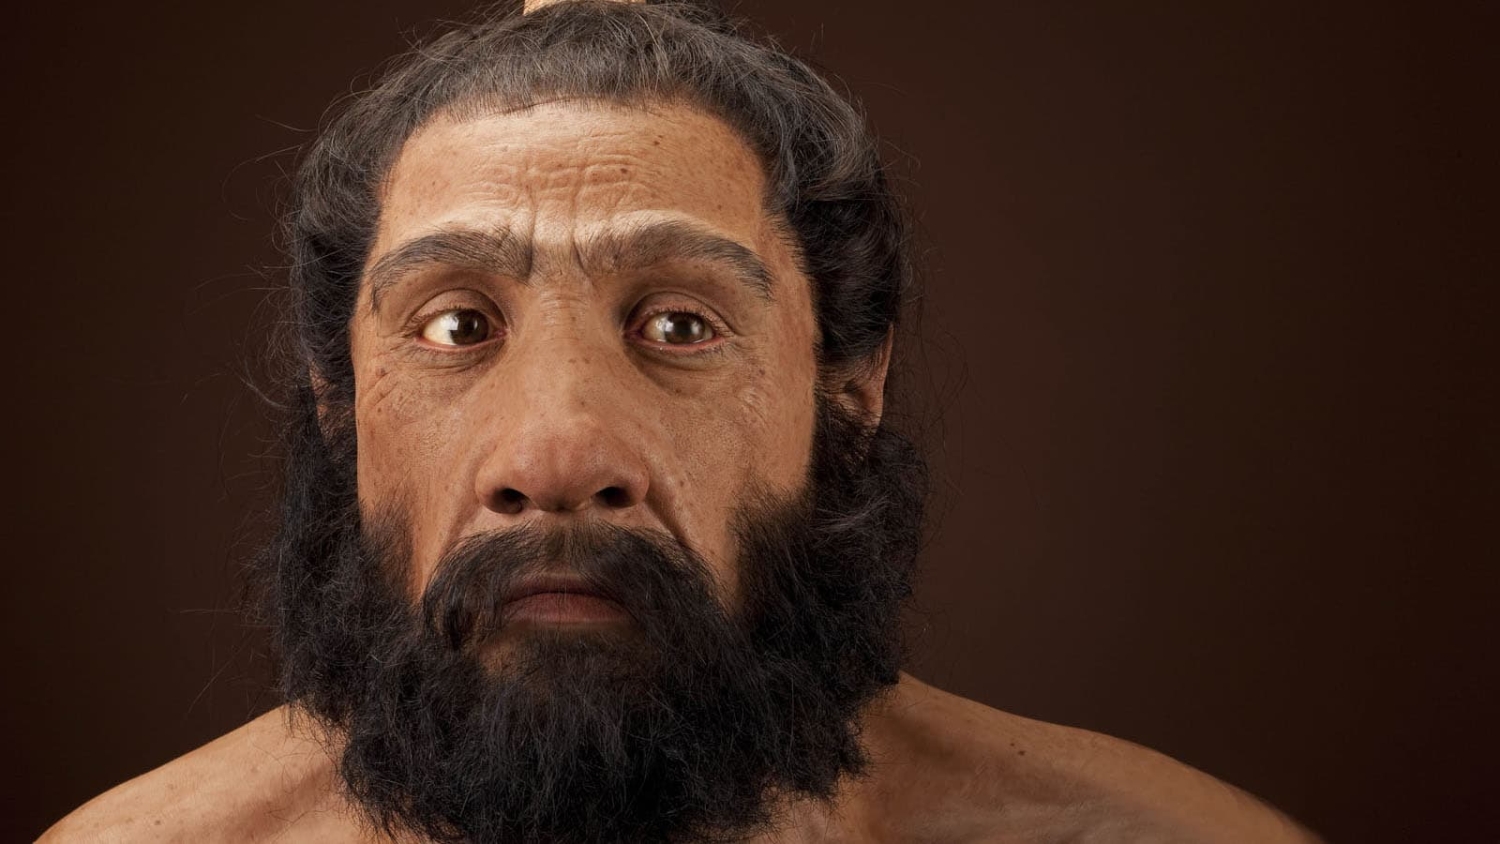 lifelike sculpture of a powerfully built neandertal man with a broad brow, brown hair and beard